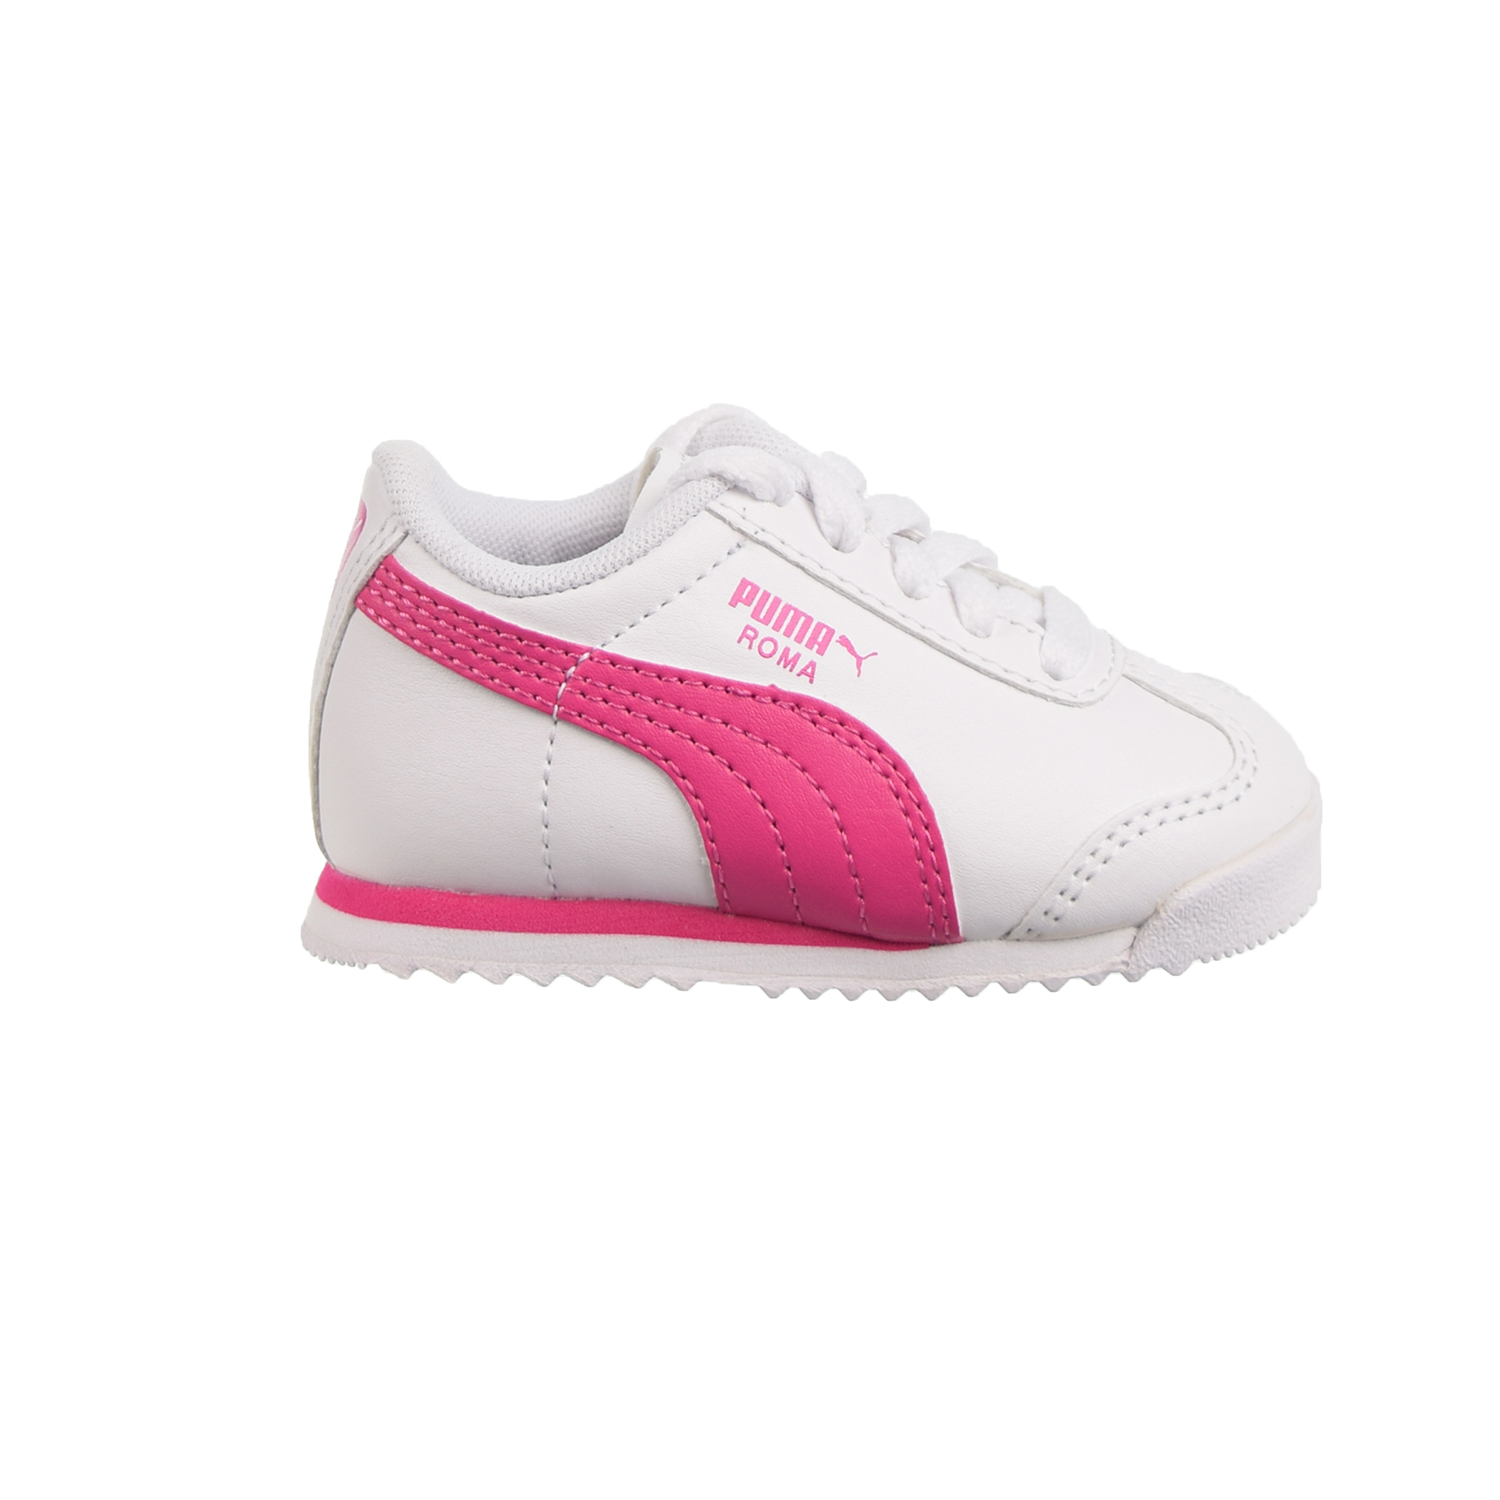 puma sneakers for toddlers